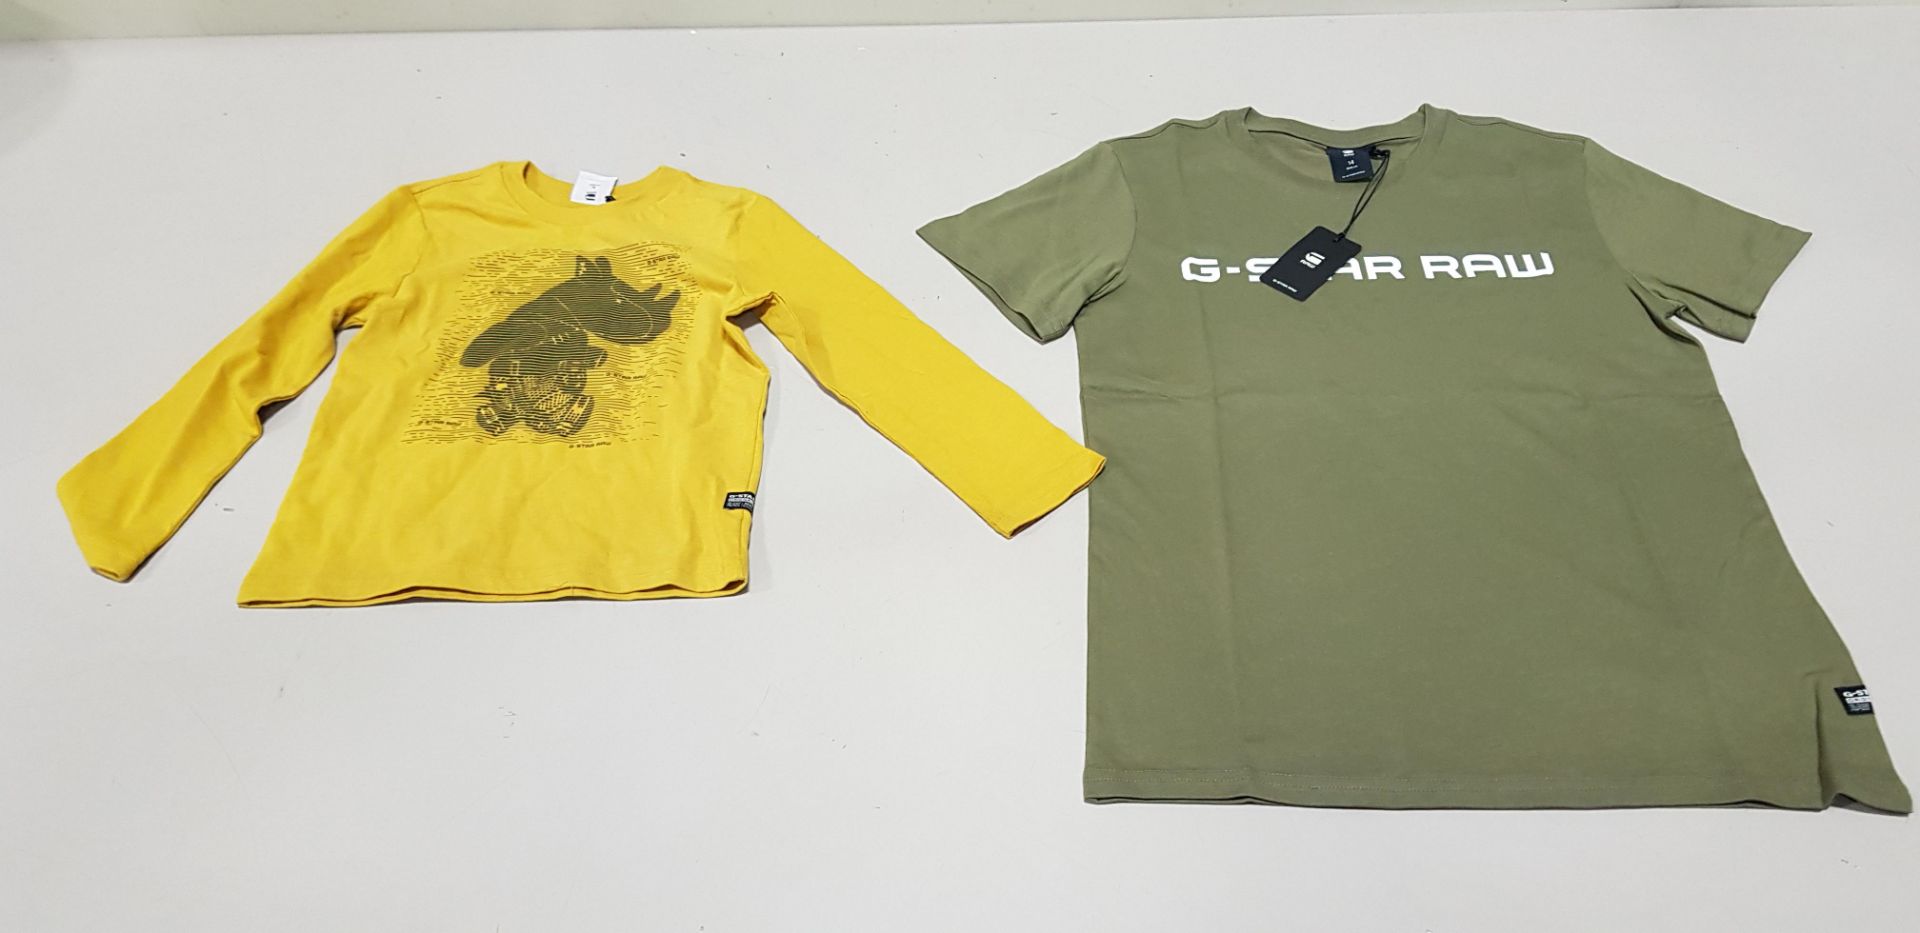 8 X BRAND NEW G STAR RAW LONG SLEEVED YELLOW CREWNECK T SHIRTS AND 2 X KHAKI G STAR T SHIRTS IN